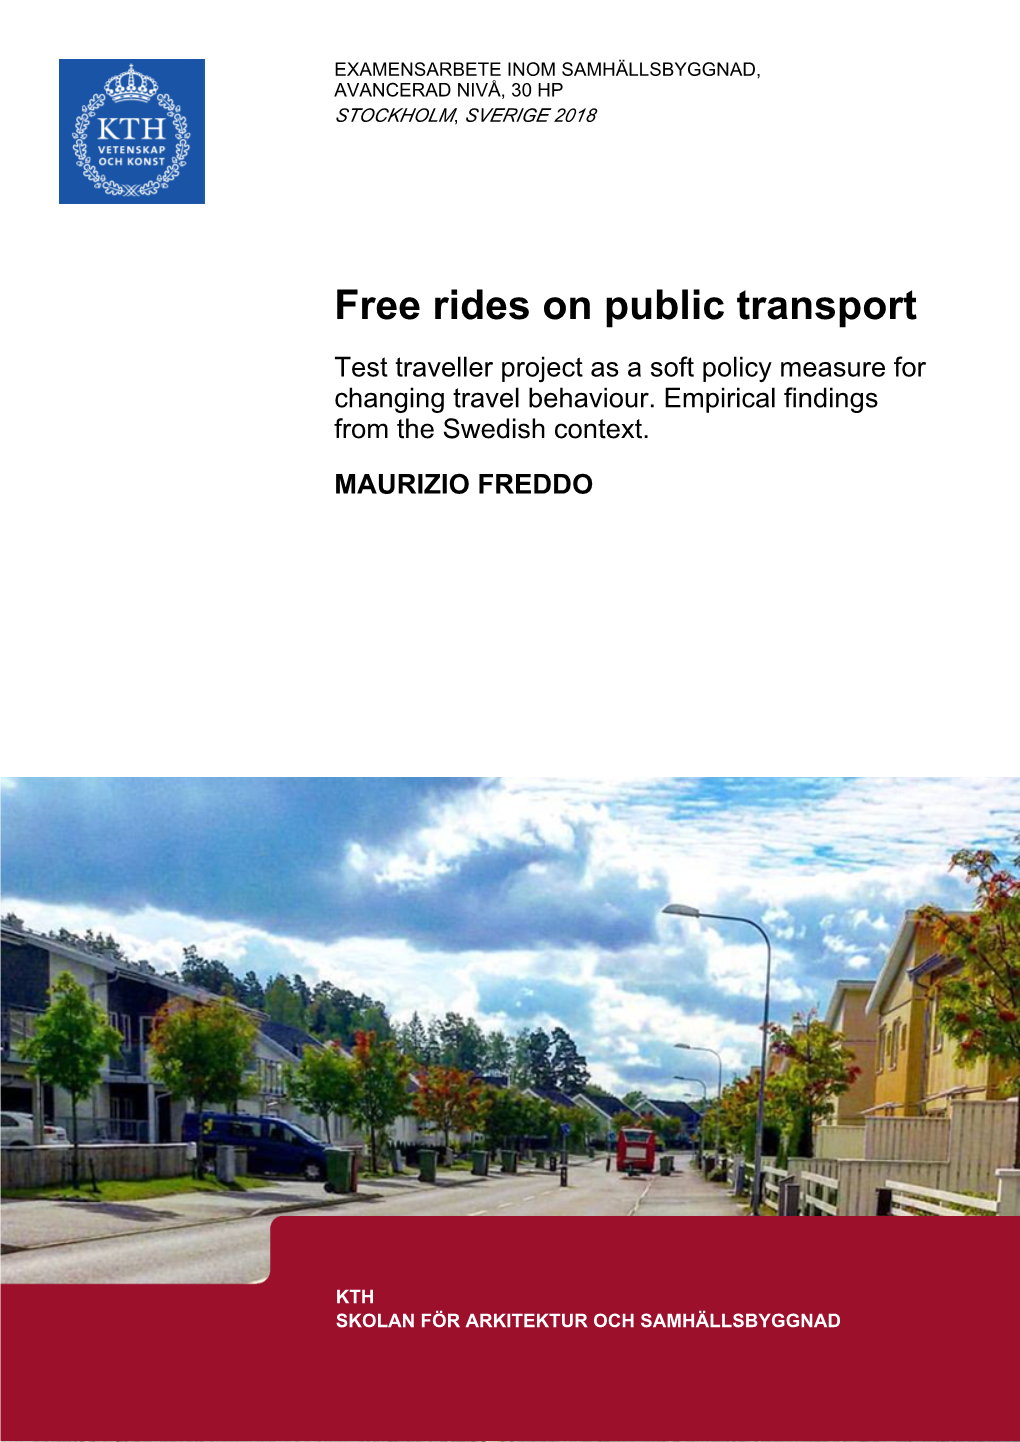 Free Rides on Public Transport Test Traveller Project As a Soft Policy Measure for Changing Travel Behaviour